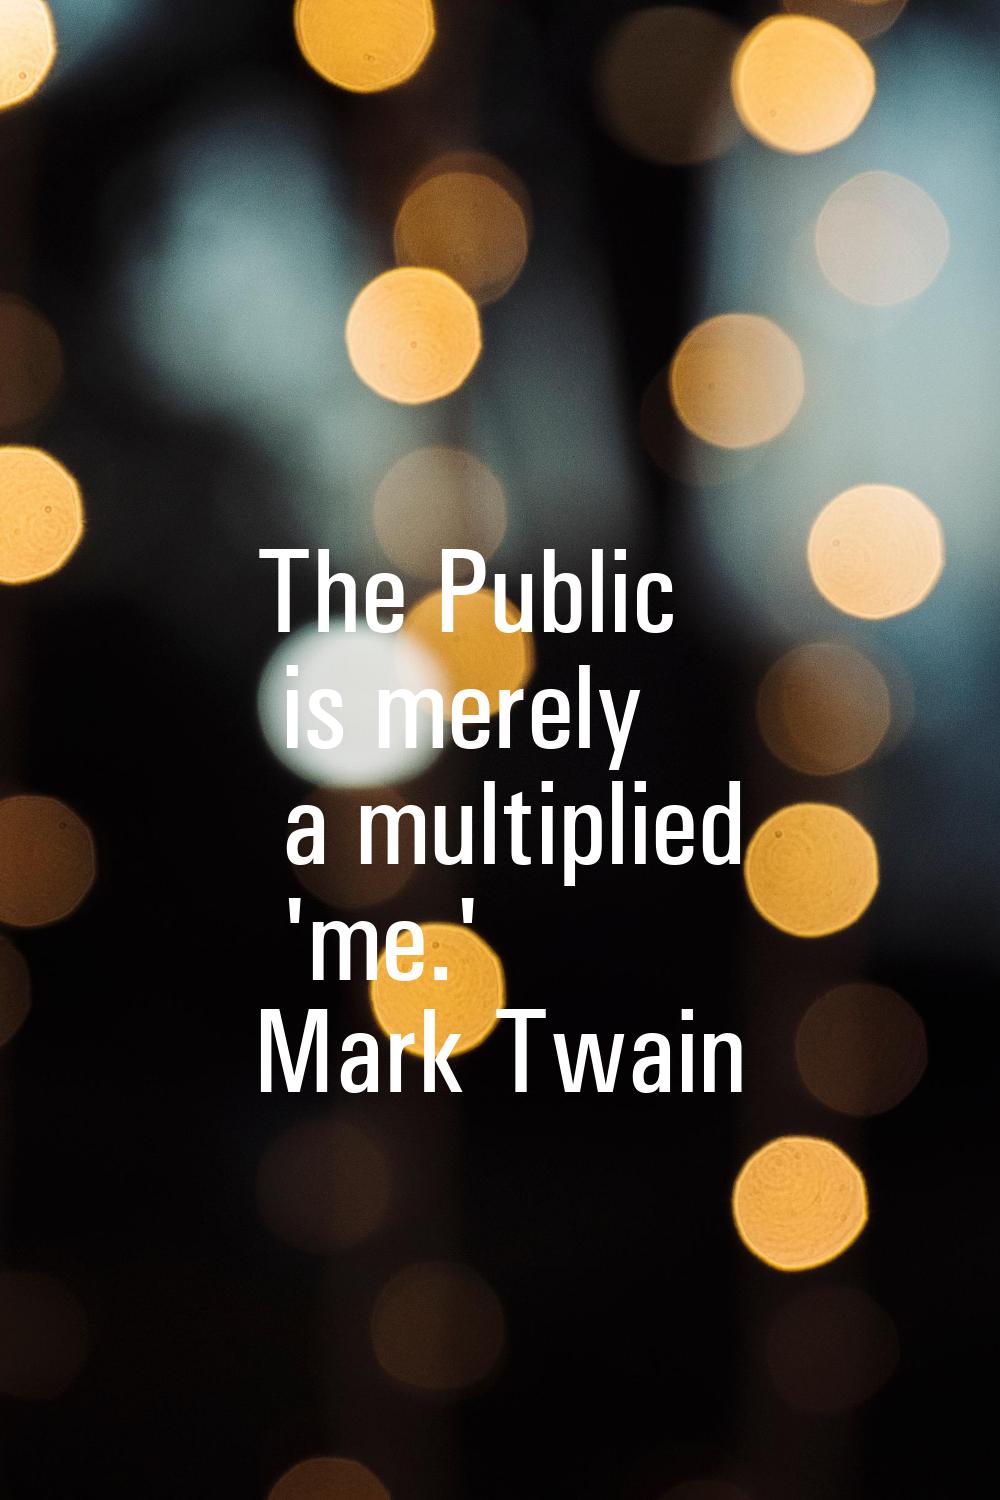 The Public is merely a multiplied 'me.'